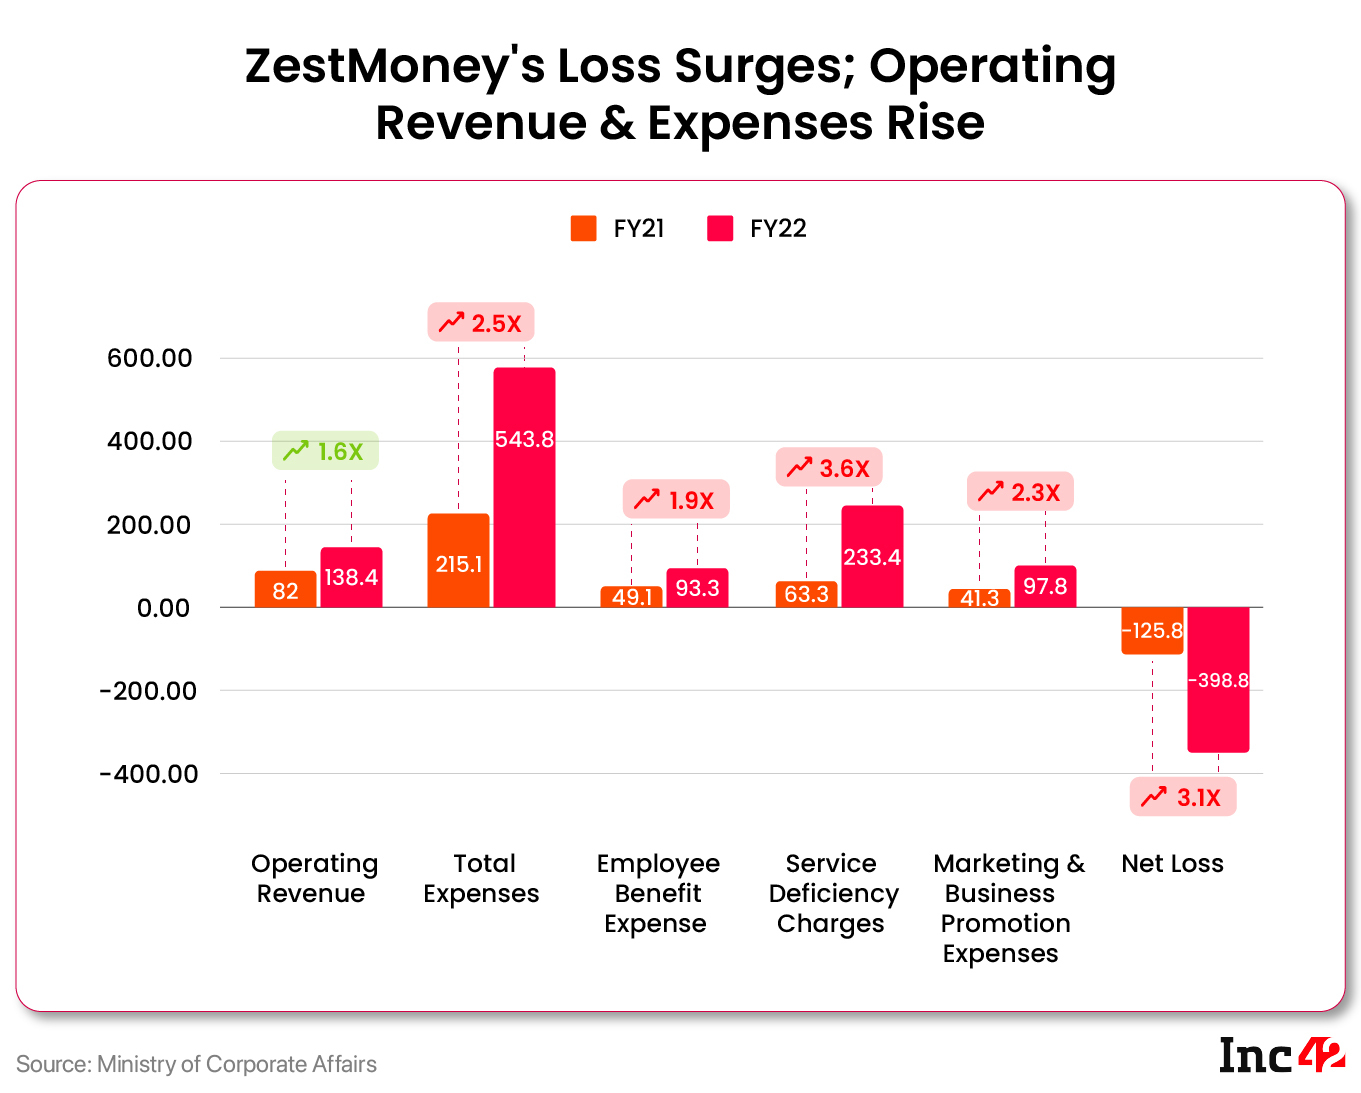 ZestMoney’s Loss Jumps 3X To INR 399 Cr In FY22, Operating Revenue Up To INR 138 Cr